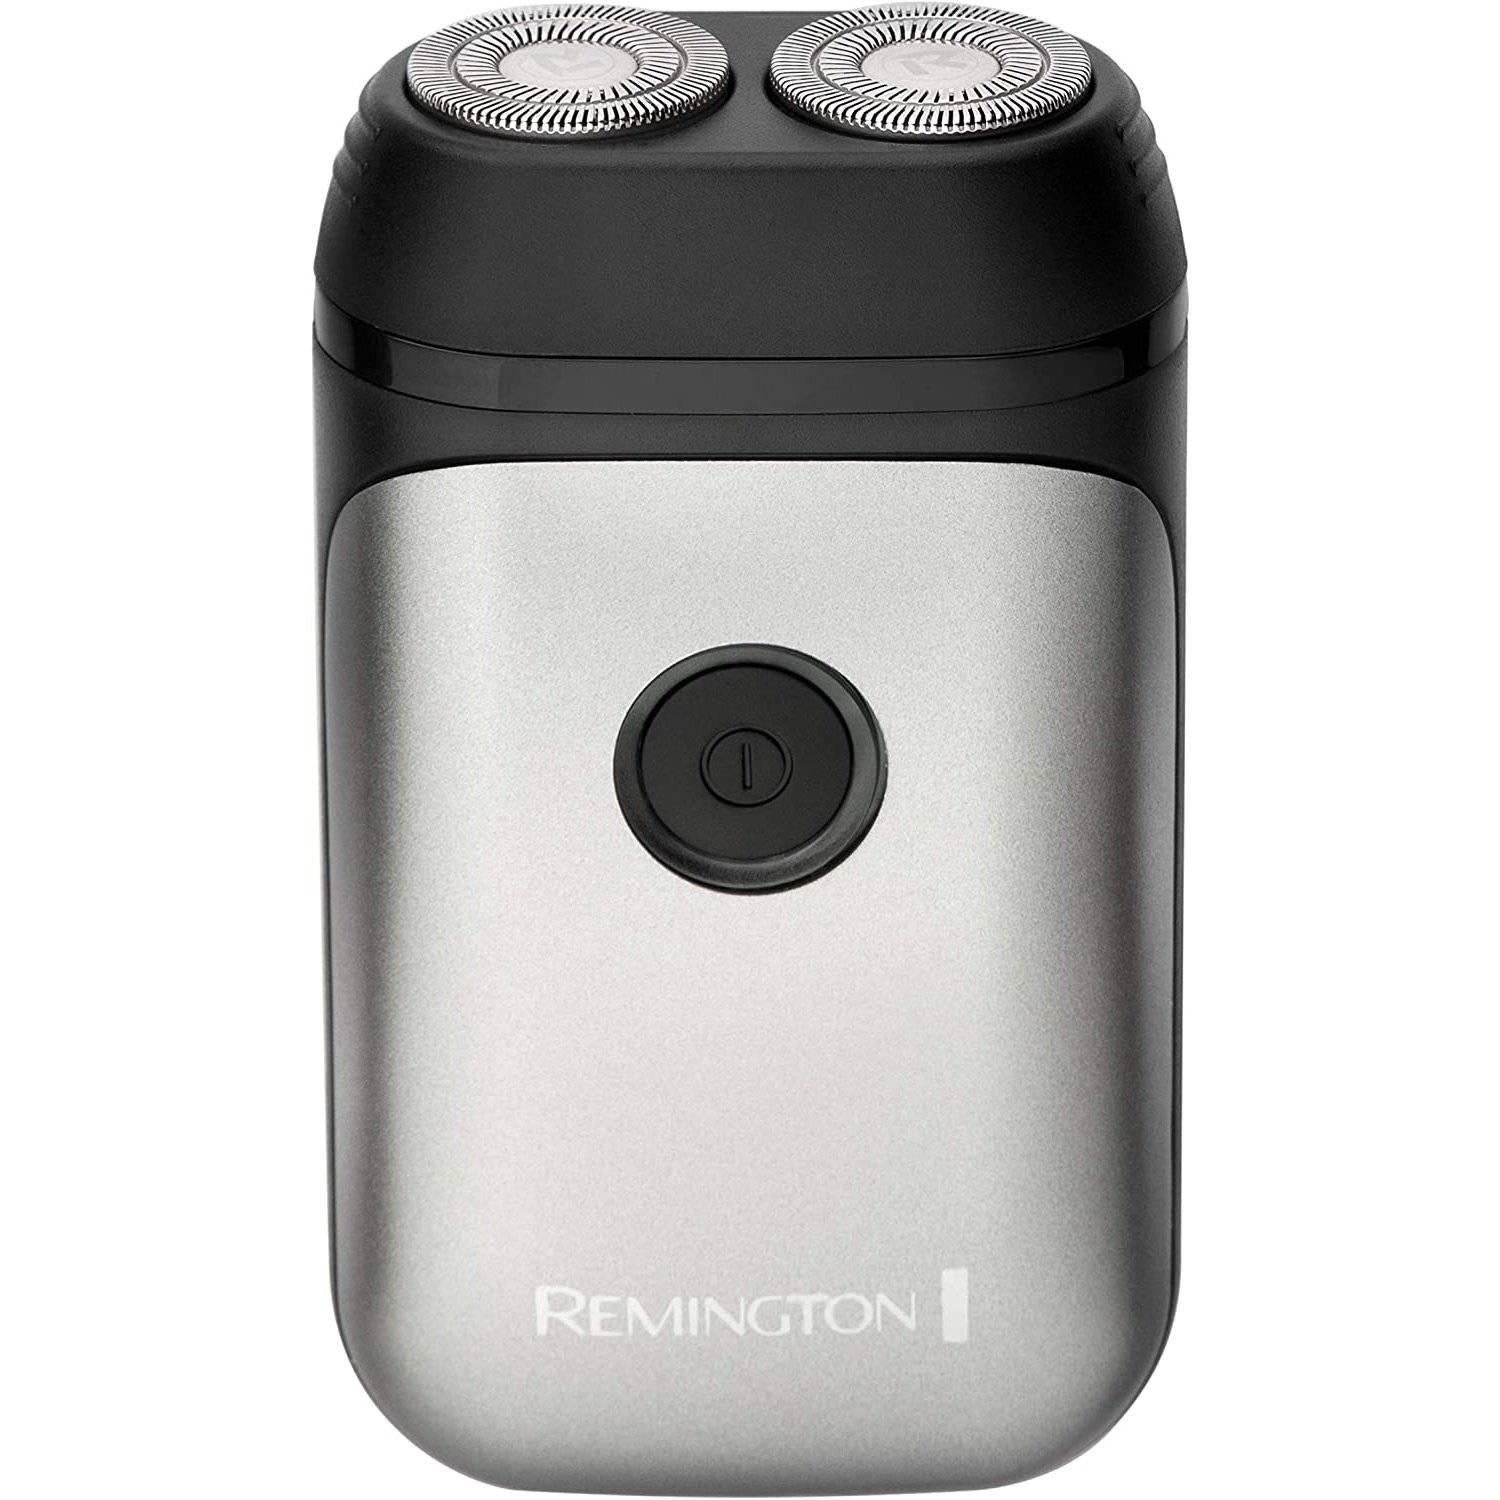 Remington Men's R95 Travel Rotary Shaver - Dual Track Cutters, Rechargeable - Healthxpress.ie